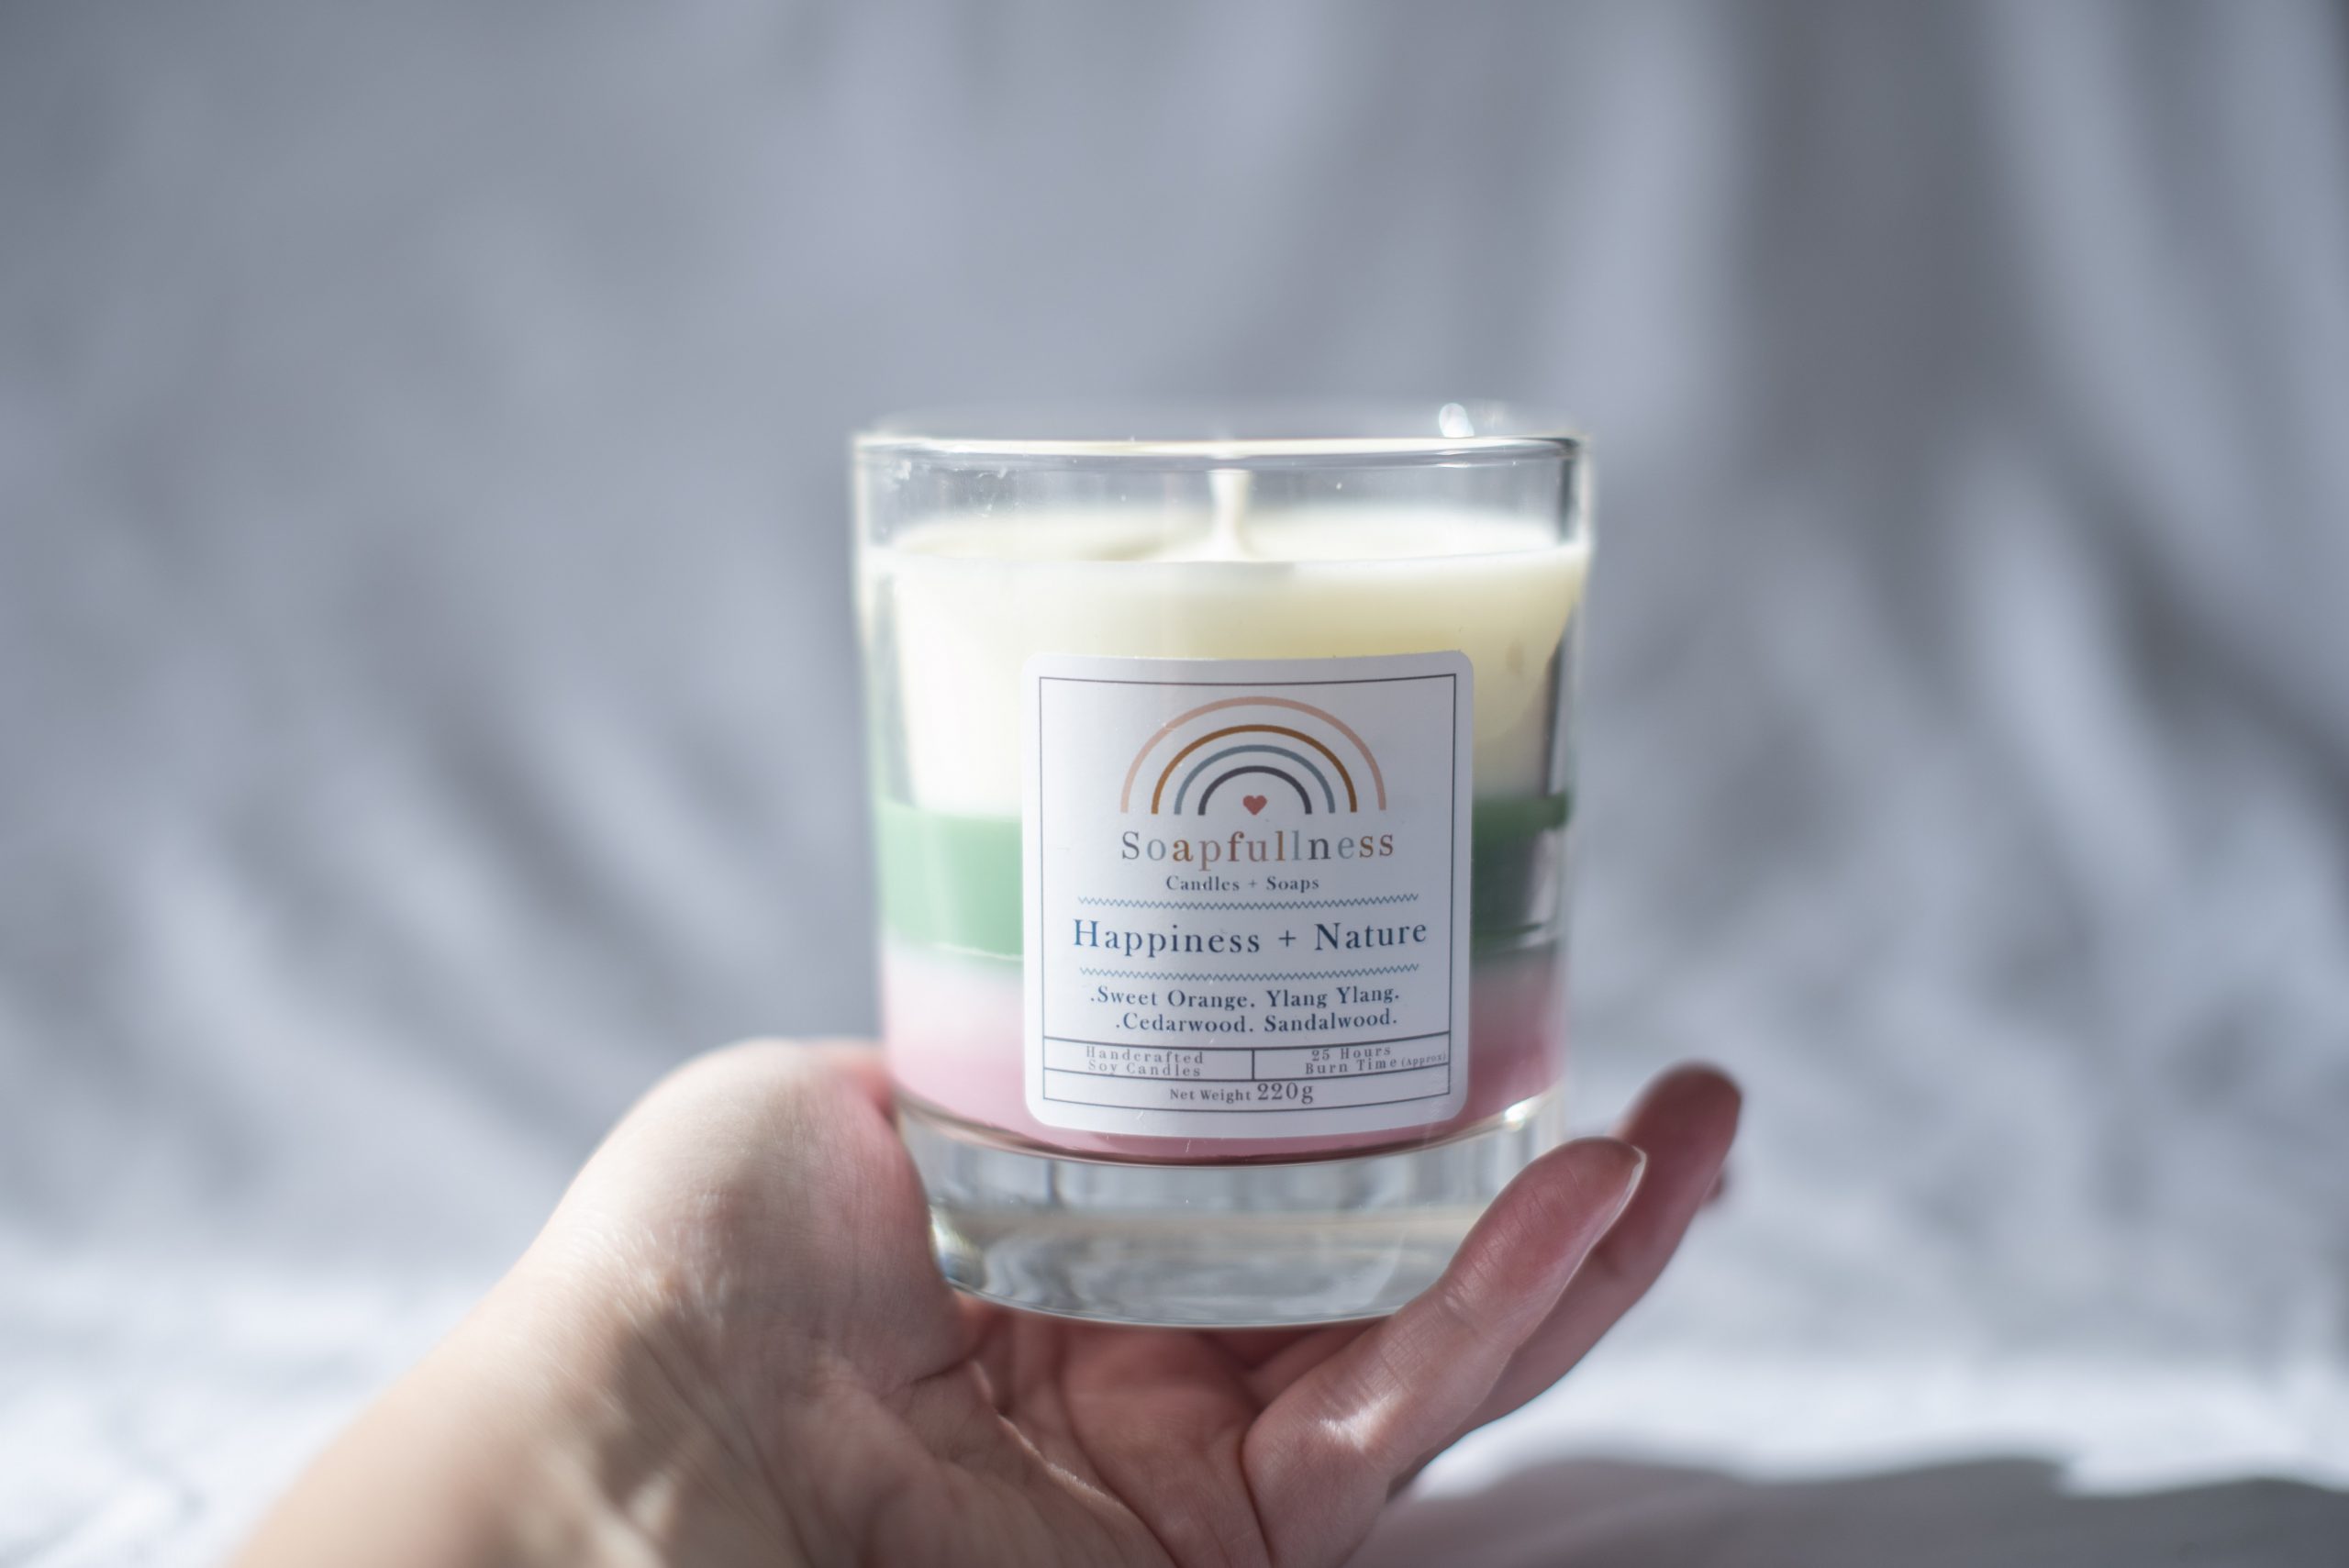 Taking a self-care day? Here 10 easy ways to use candles for self-care